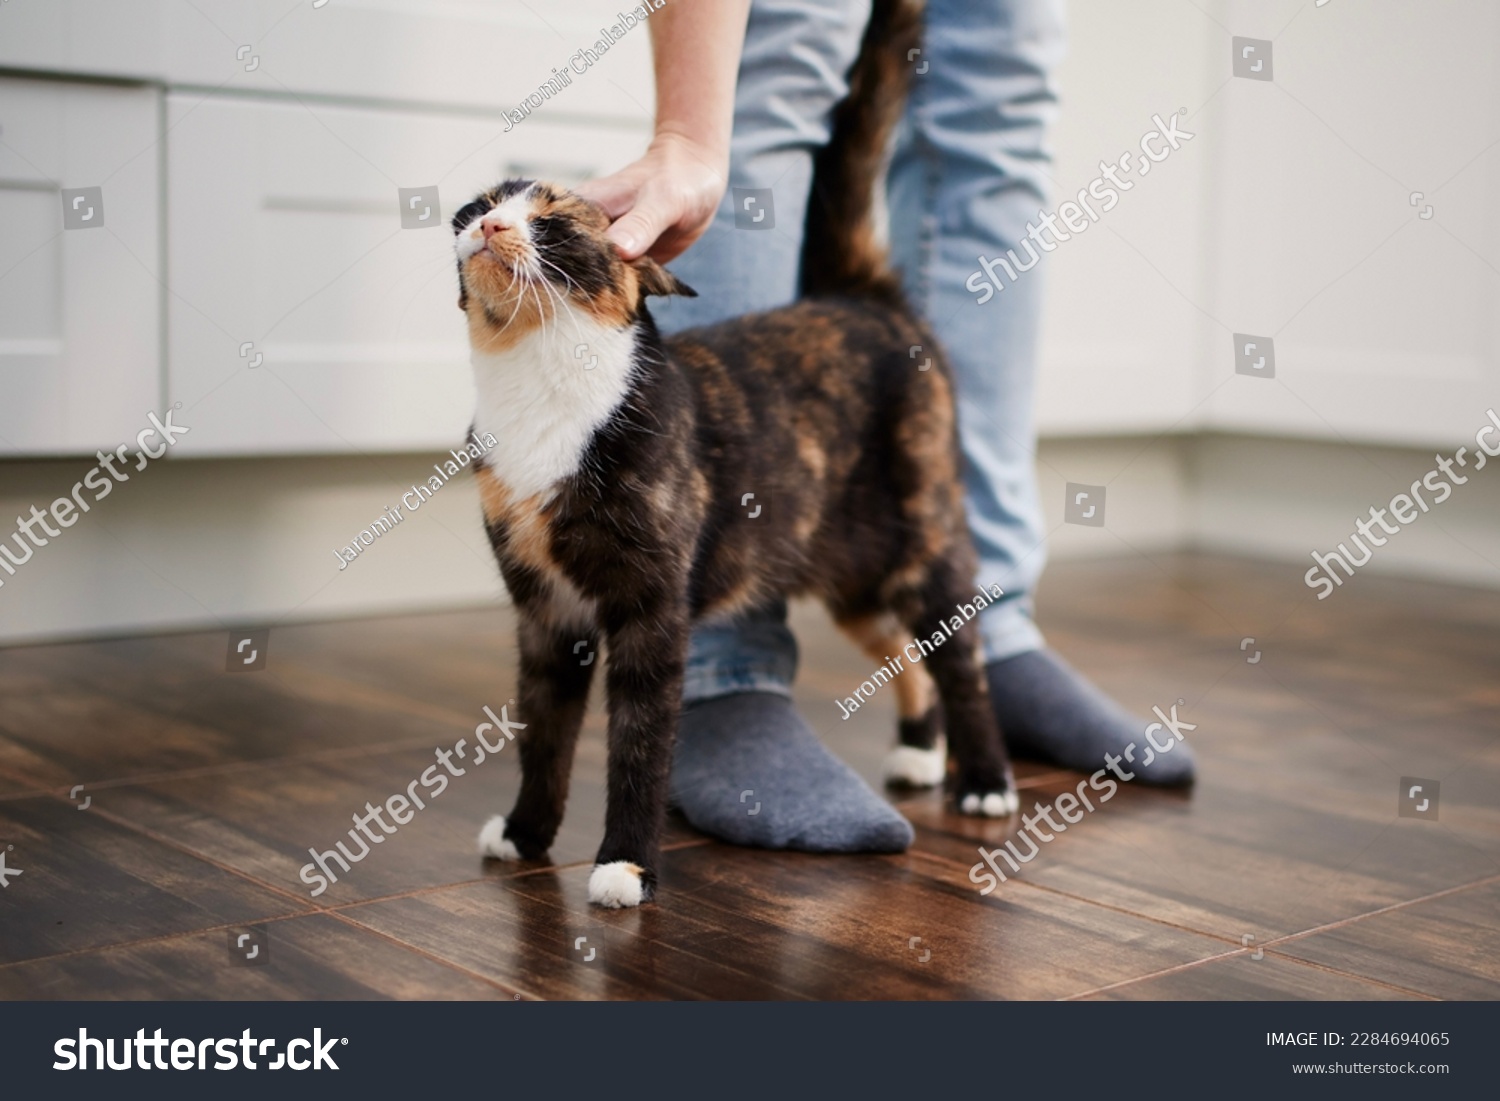 Contented cat greets her pet owner upon his arrival home. Man stroking his cute mottled cat.
 #2284694065